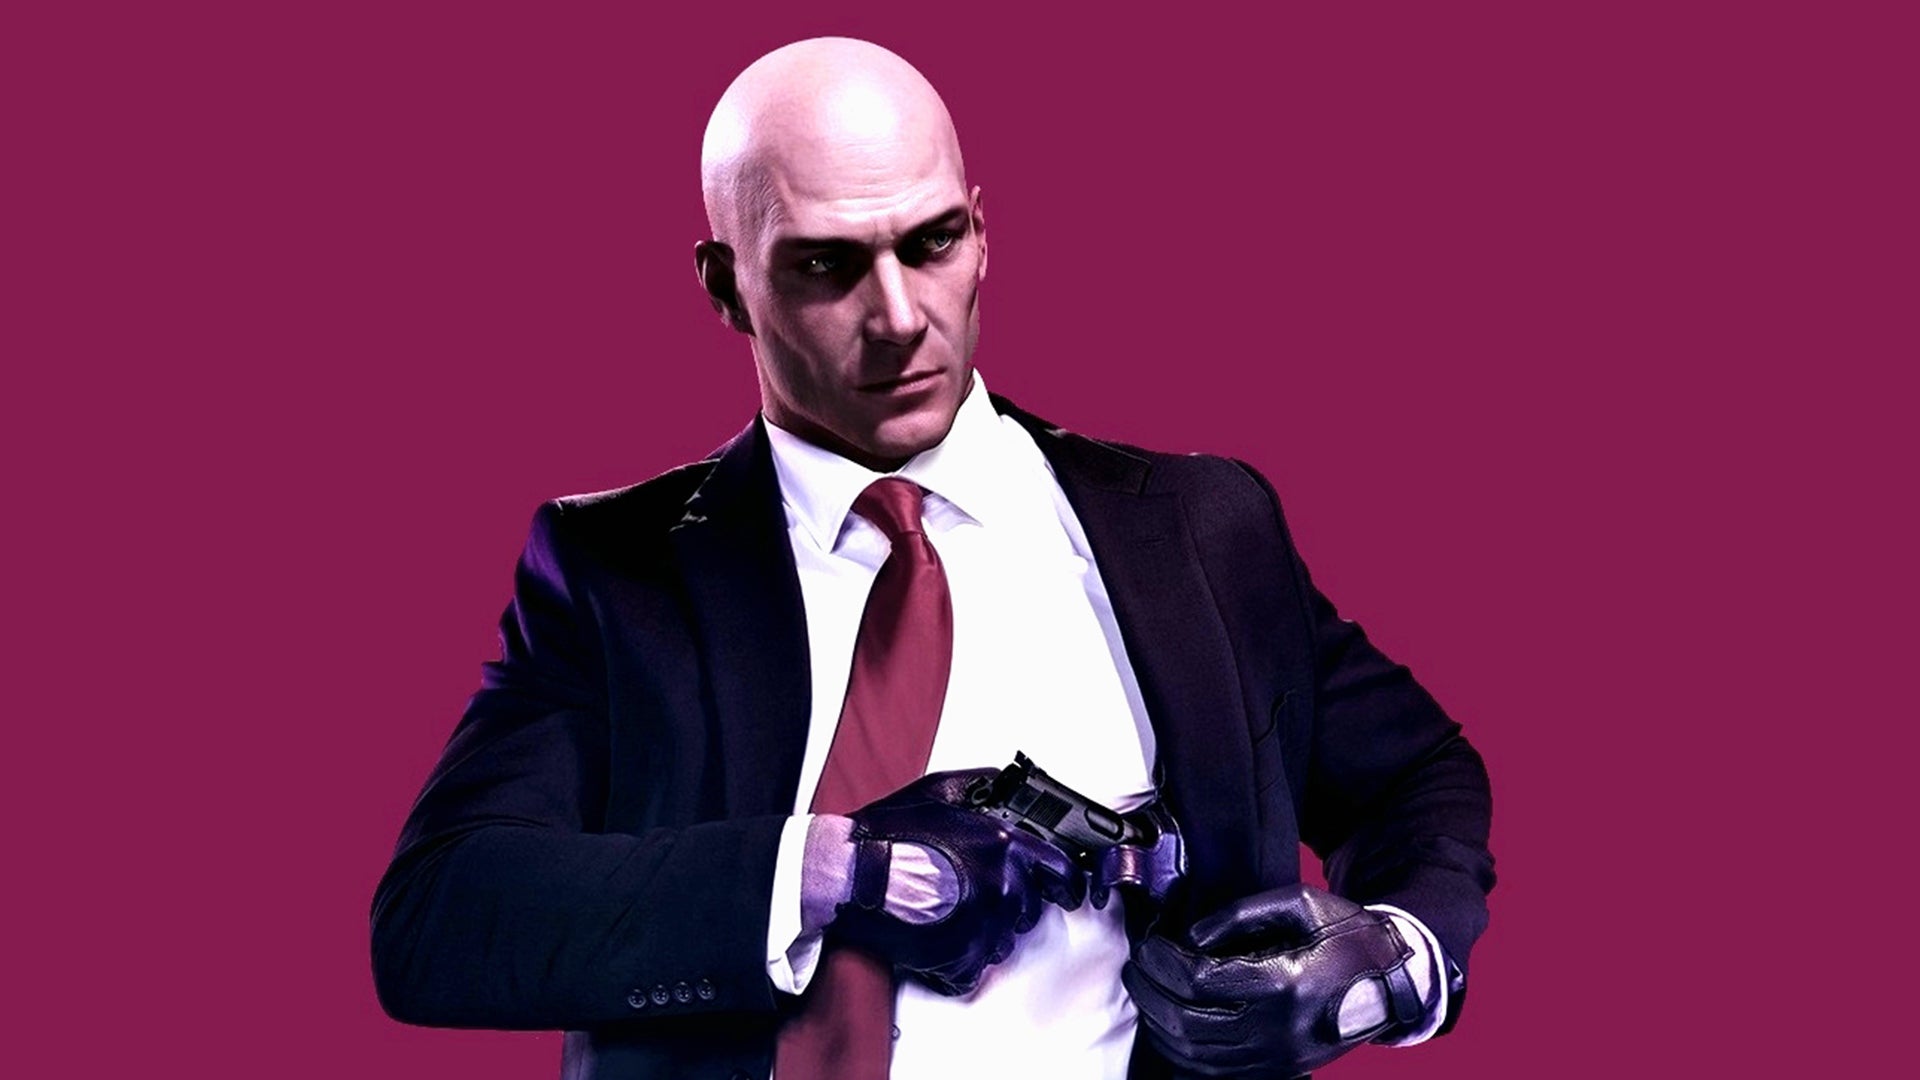 Image for Hitman 2: PS4/PS4 Pro vs Xbox One S/Xbox One X - Every Console Tested